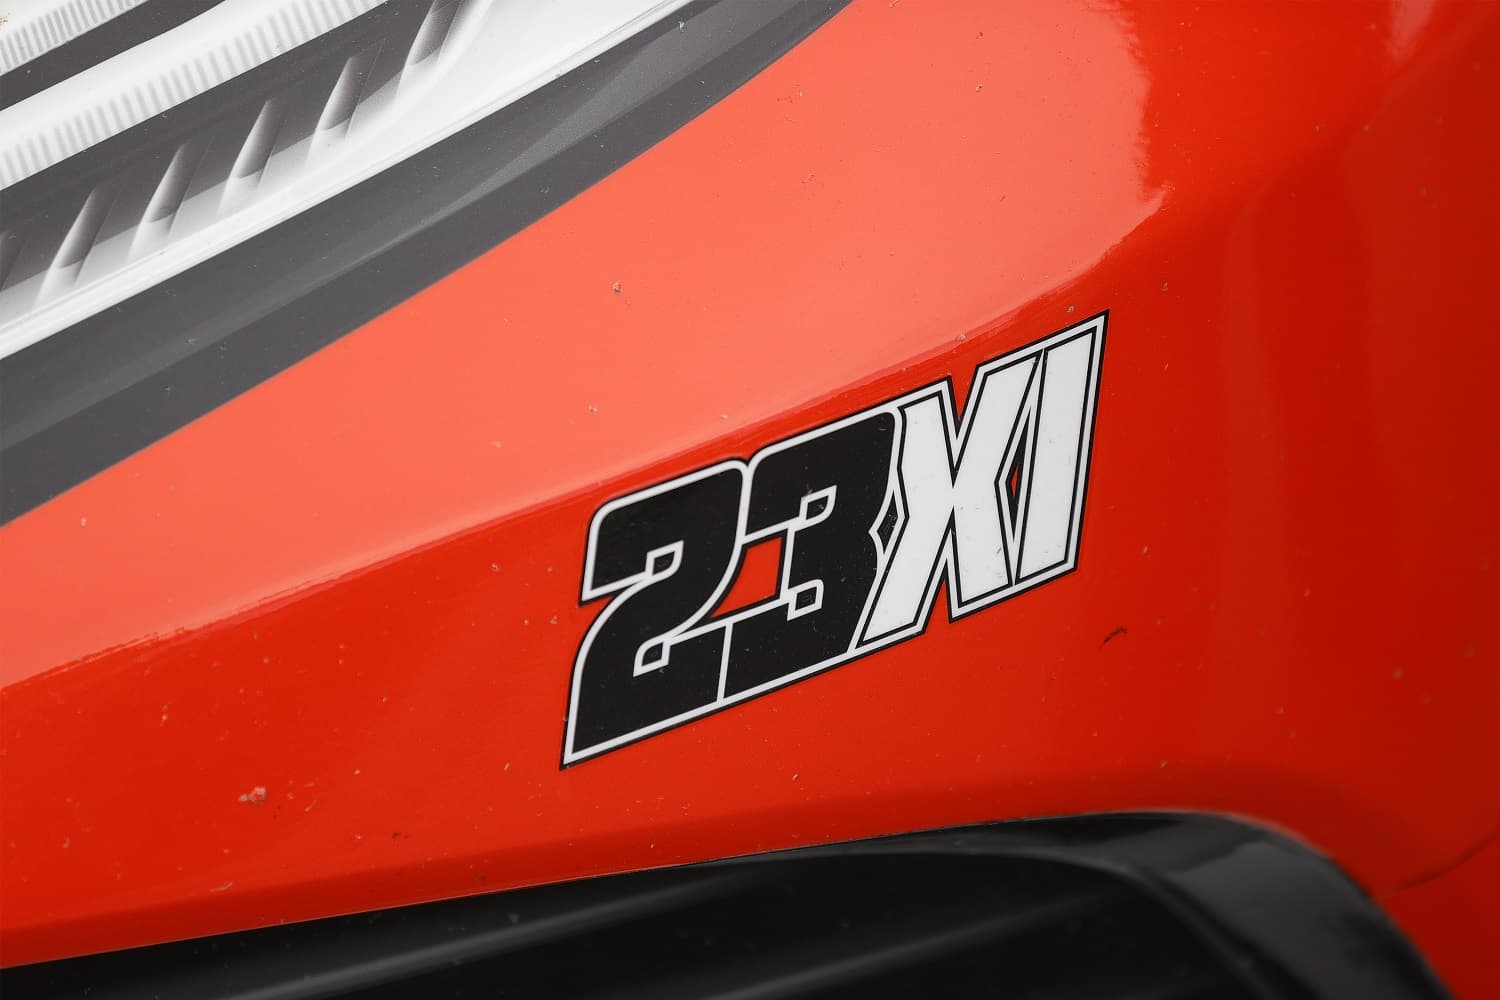 A detail of the 23XI Racing logo on the #23 DoorDash Toyota driven by Bubba Wallace on the starting grid prior to the NASCAR Cup Series Daytona 500 on February 14, 2021. |  Jared C Tilton/Getty Images